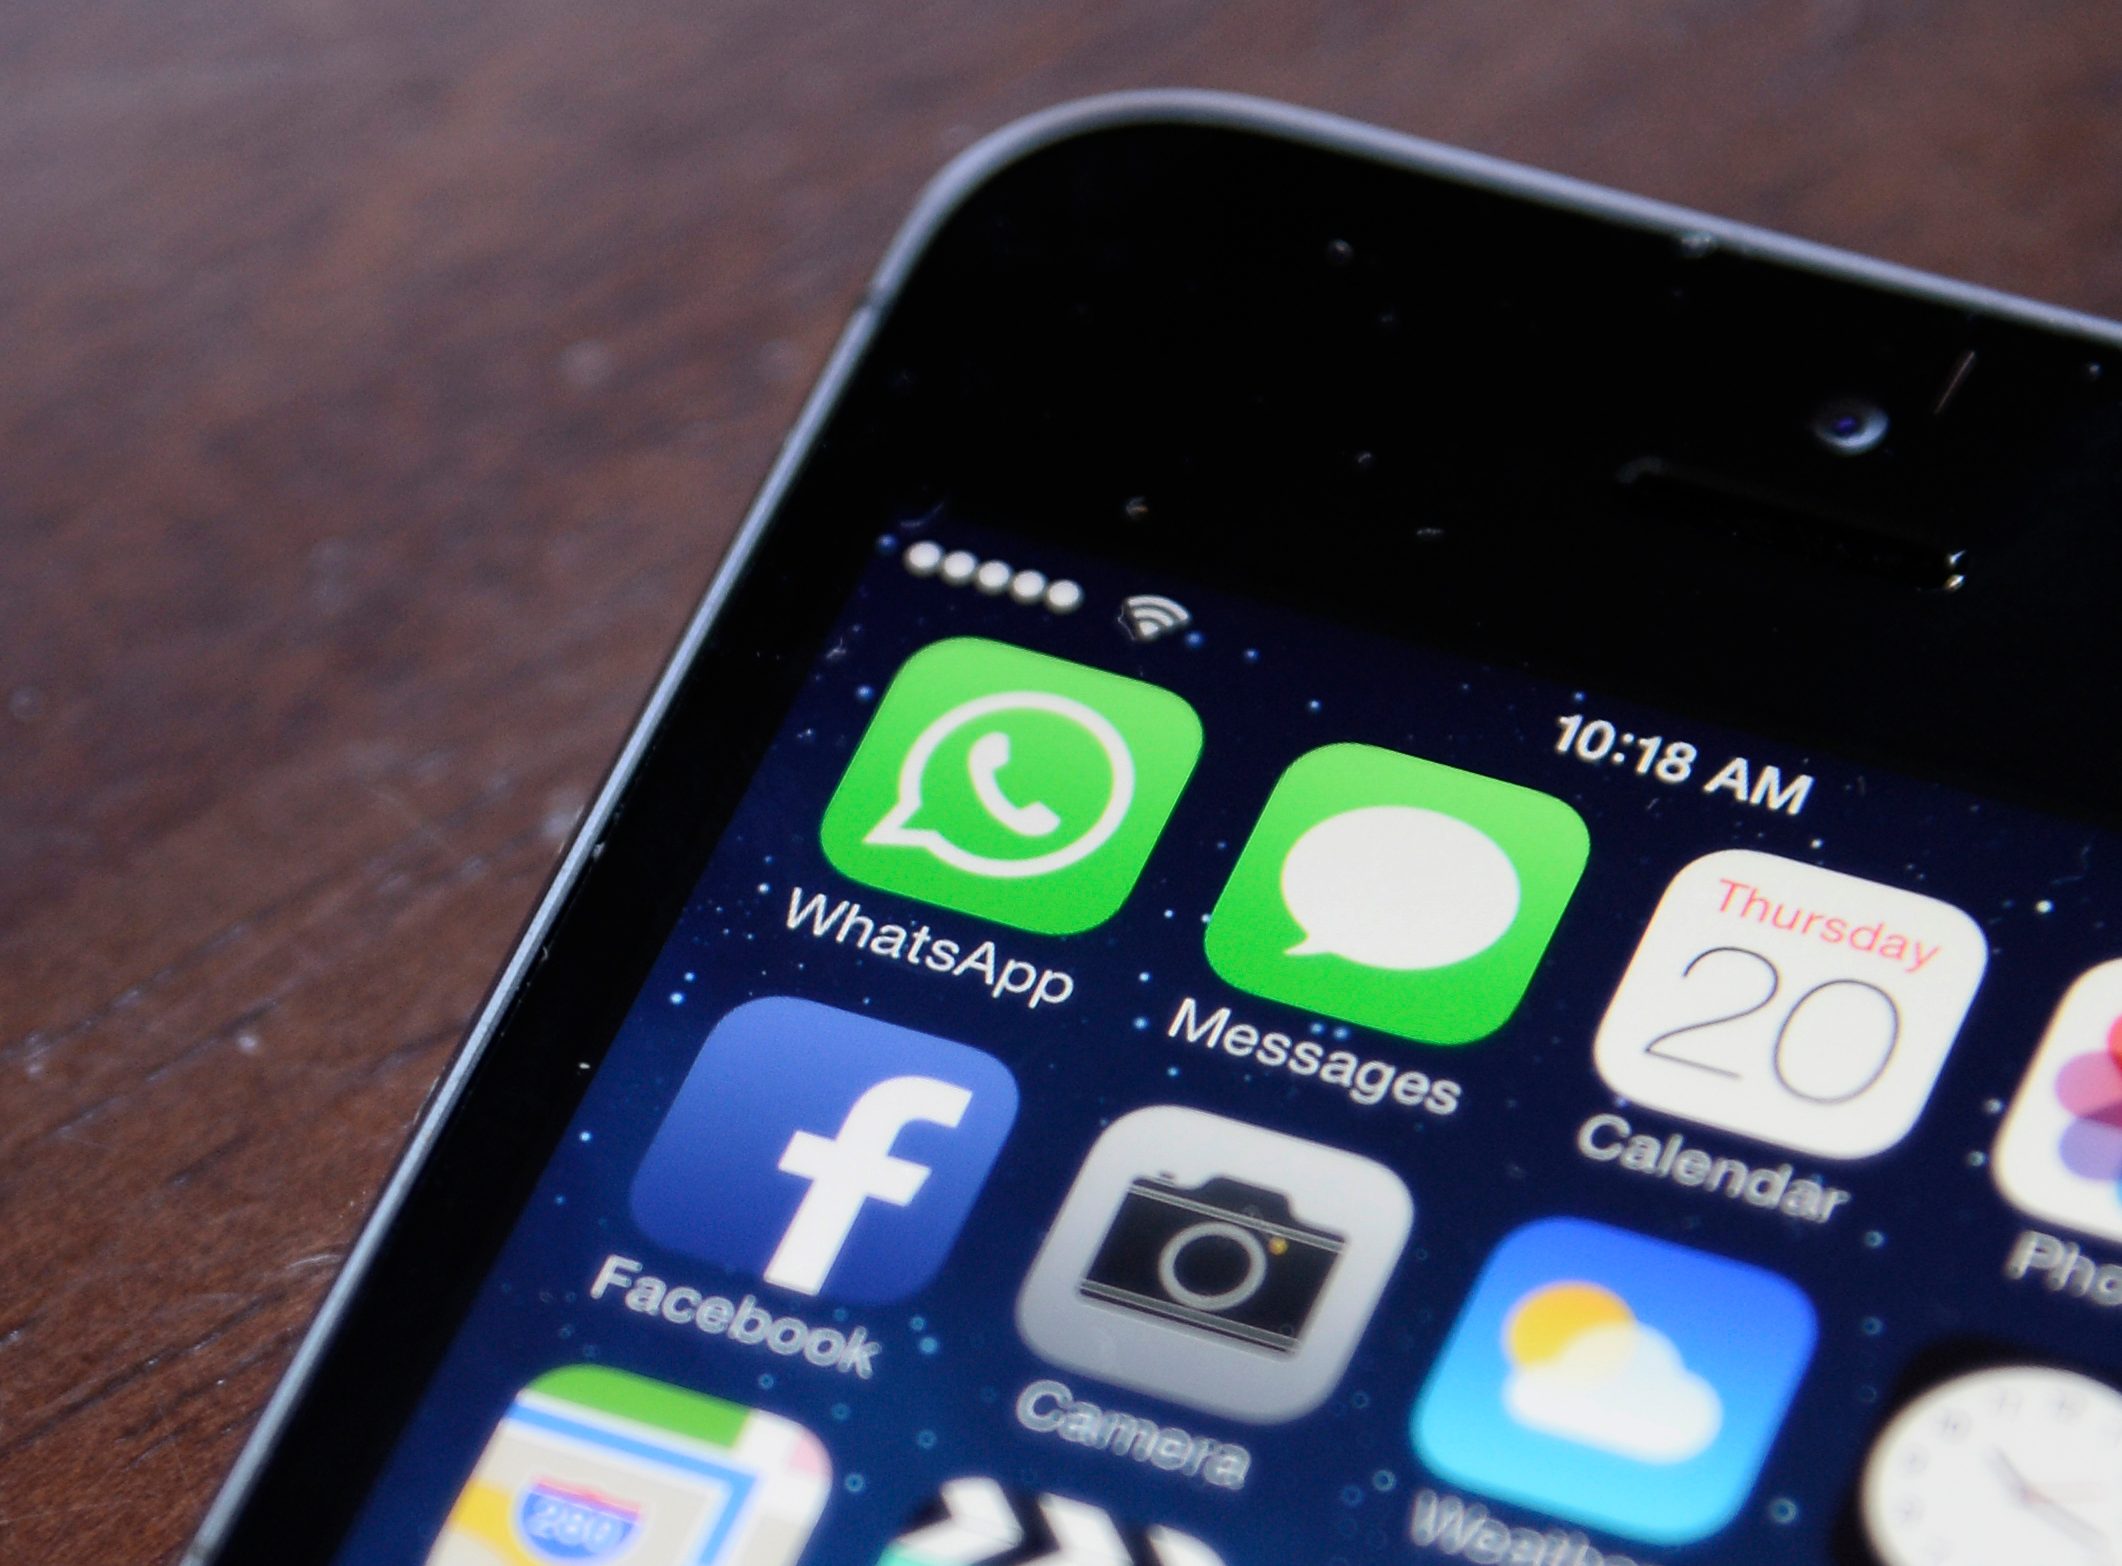 Whatsapp to end support for older mobile operating systems